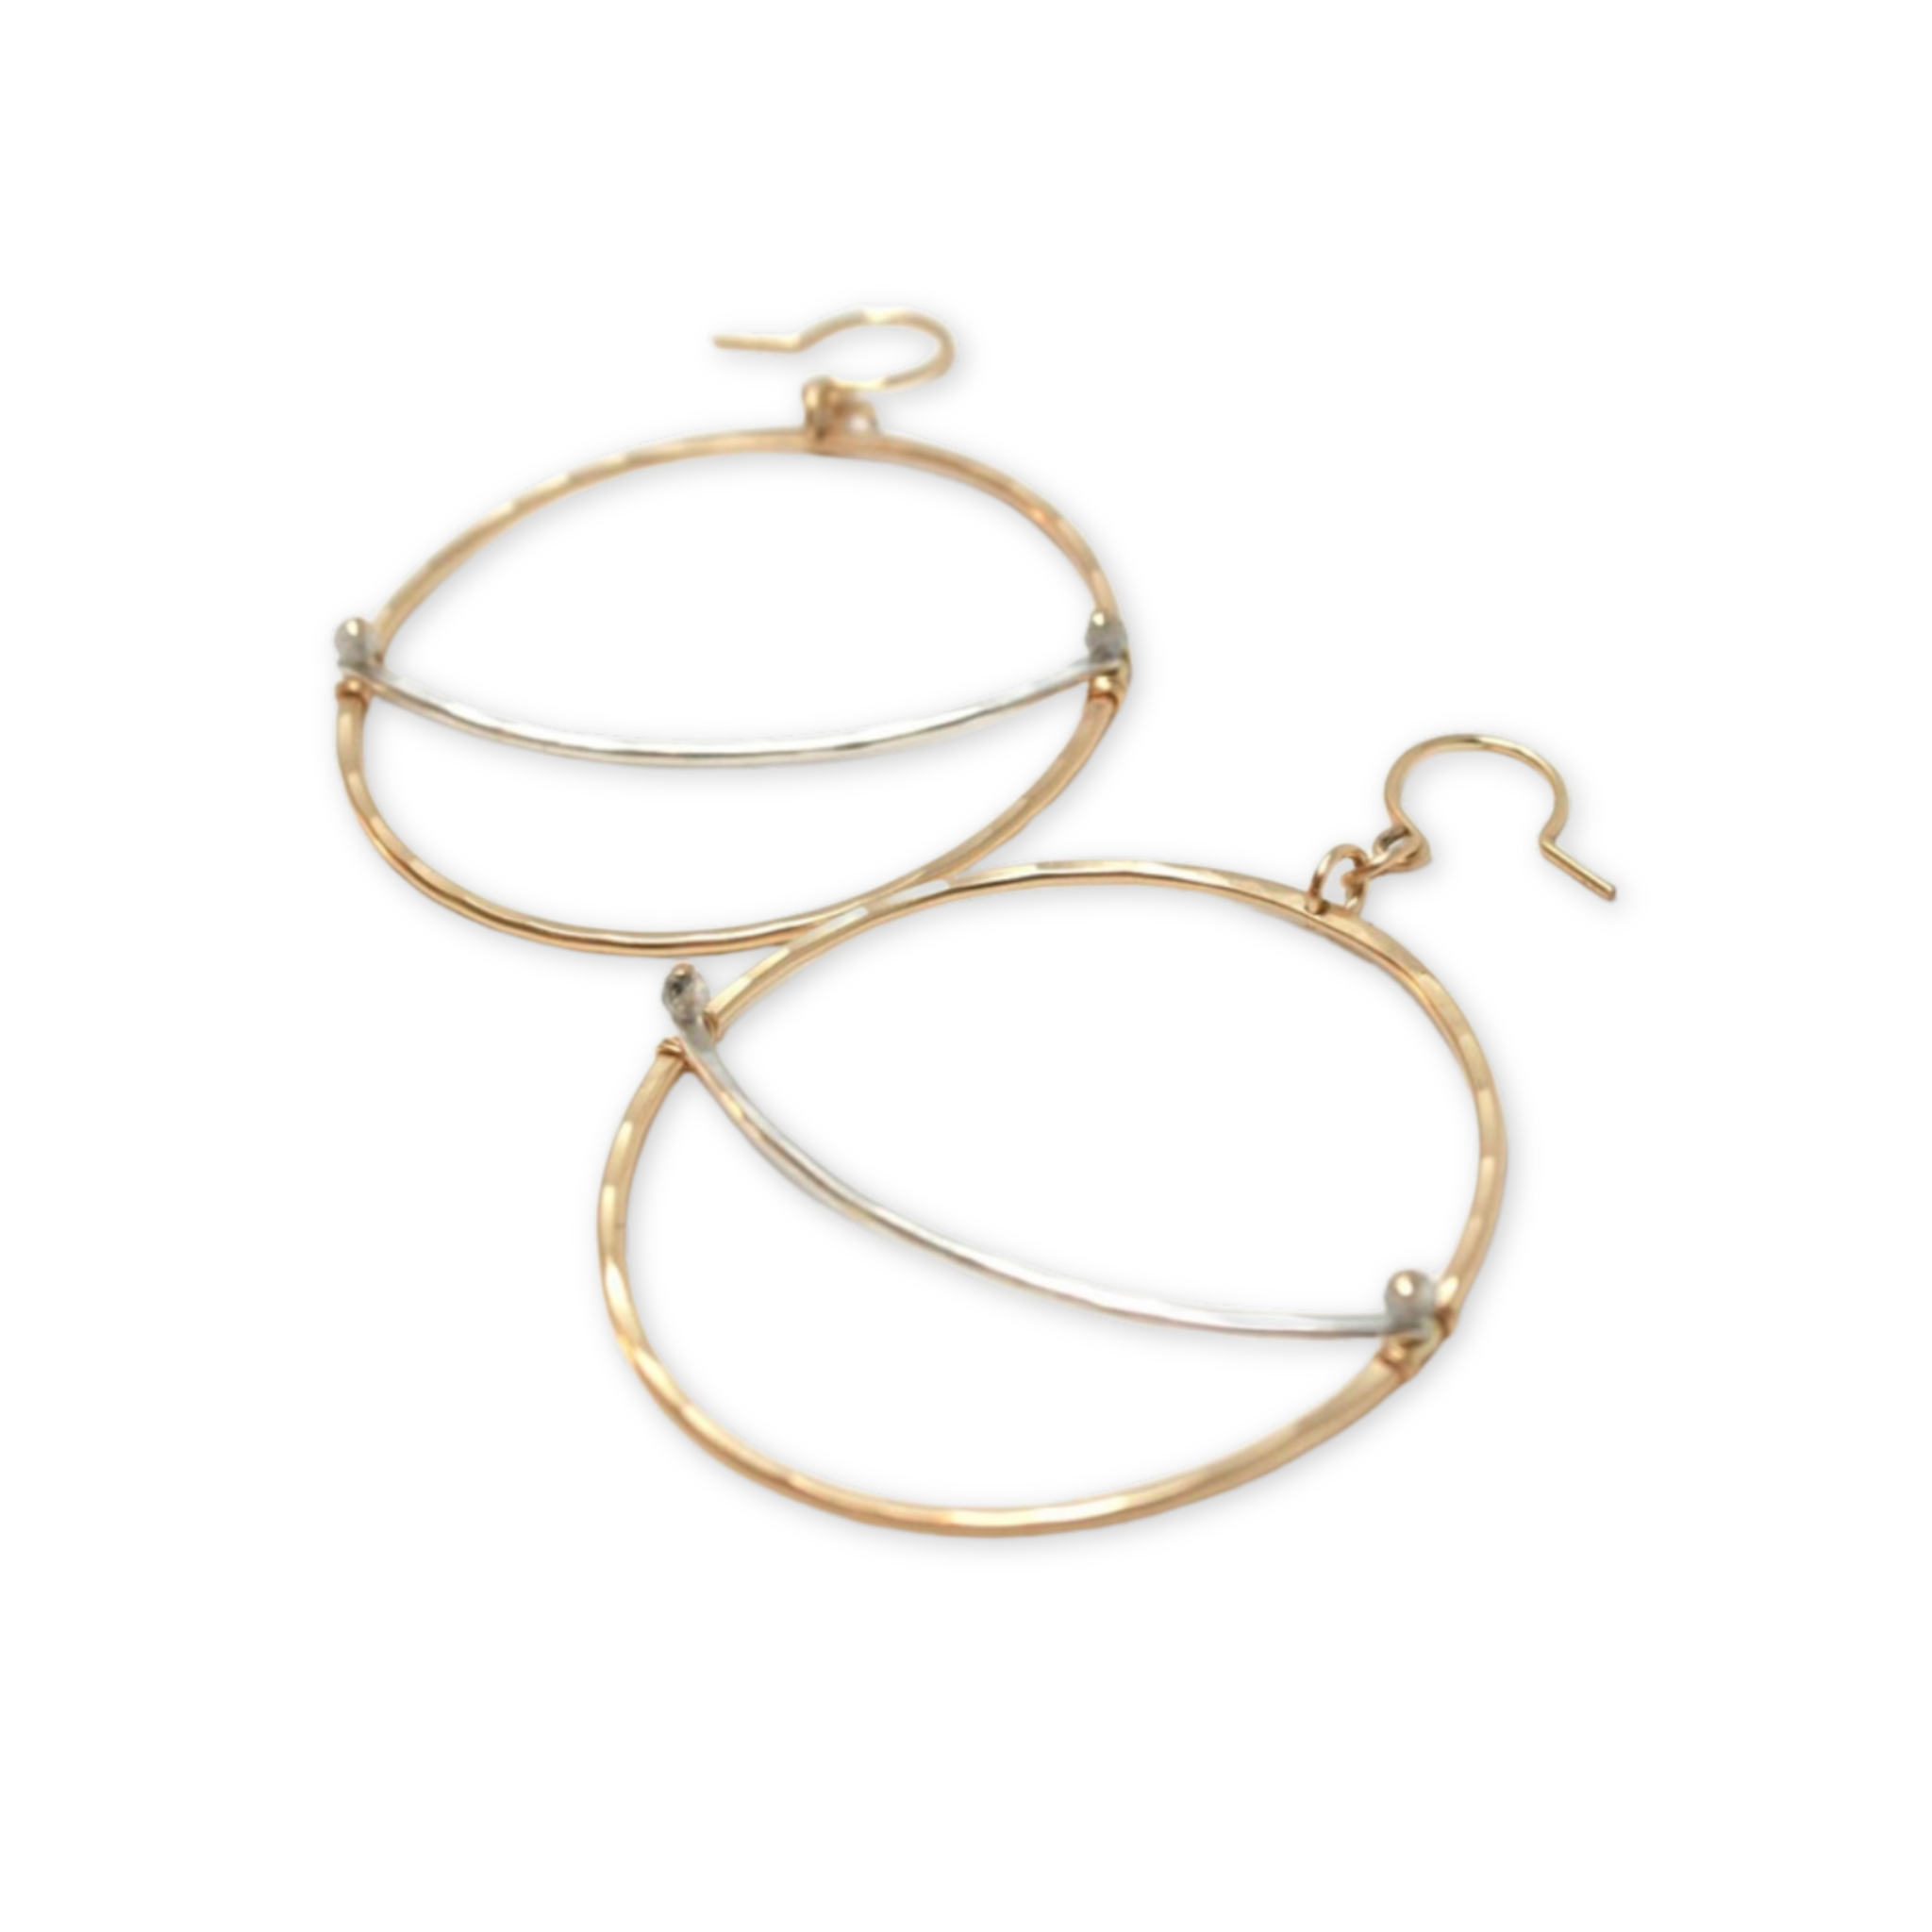 large hoop earrings with a curved bar in the middle